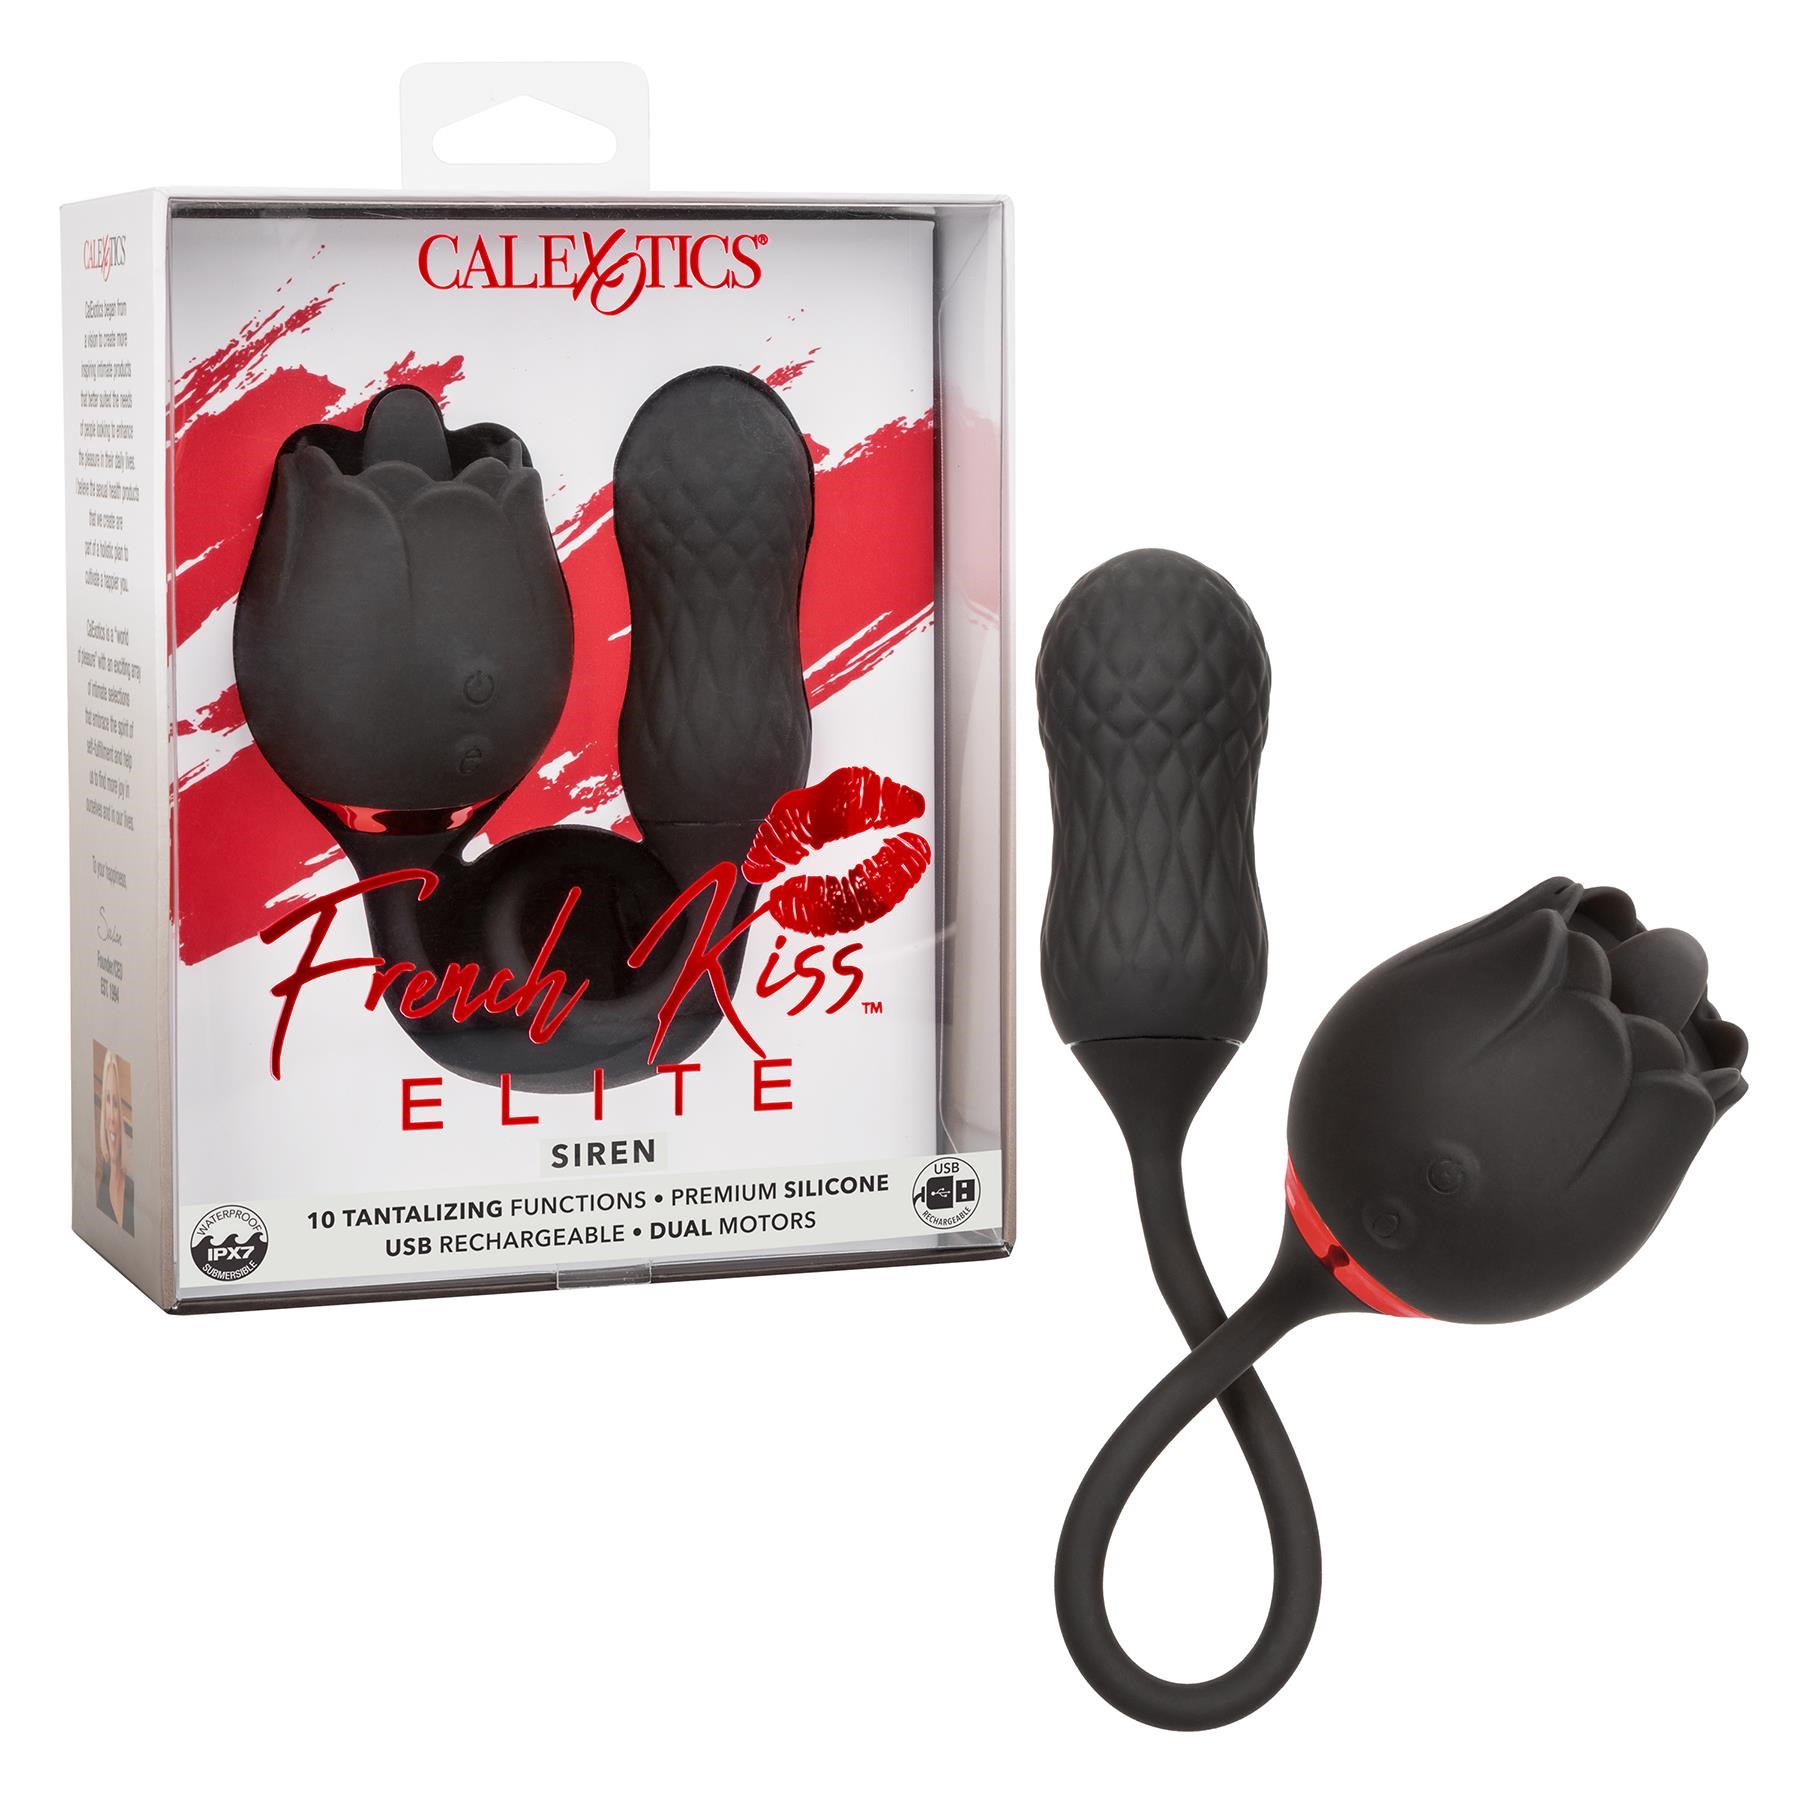 French Kiss Elite Siren Clitorial and Anal Stimulator - Product and Packaging